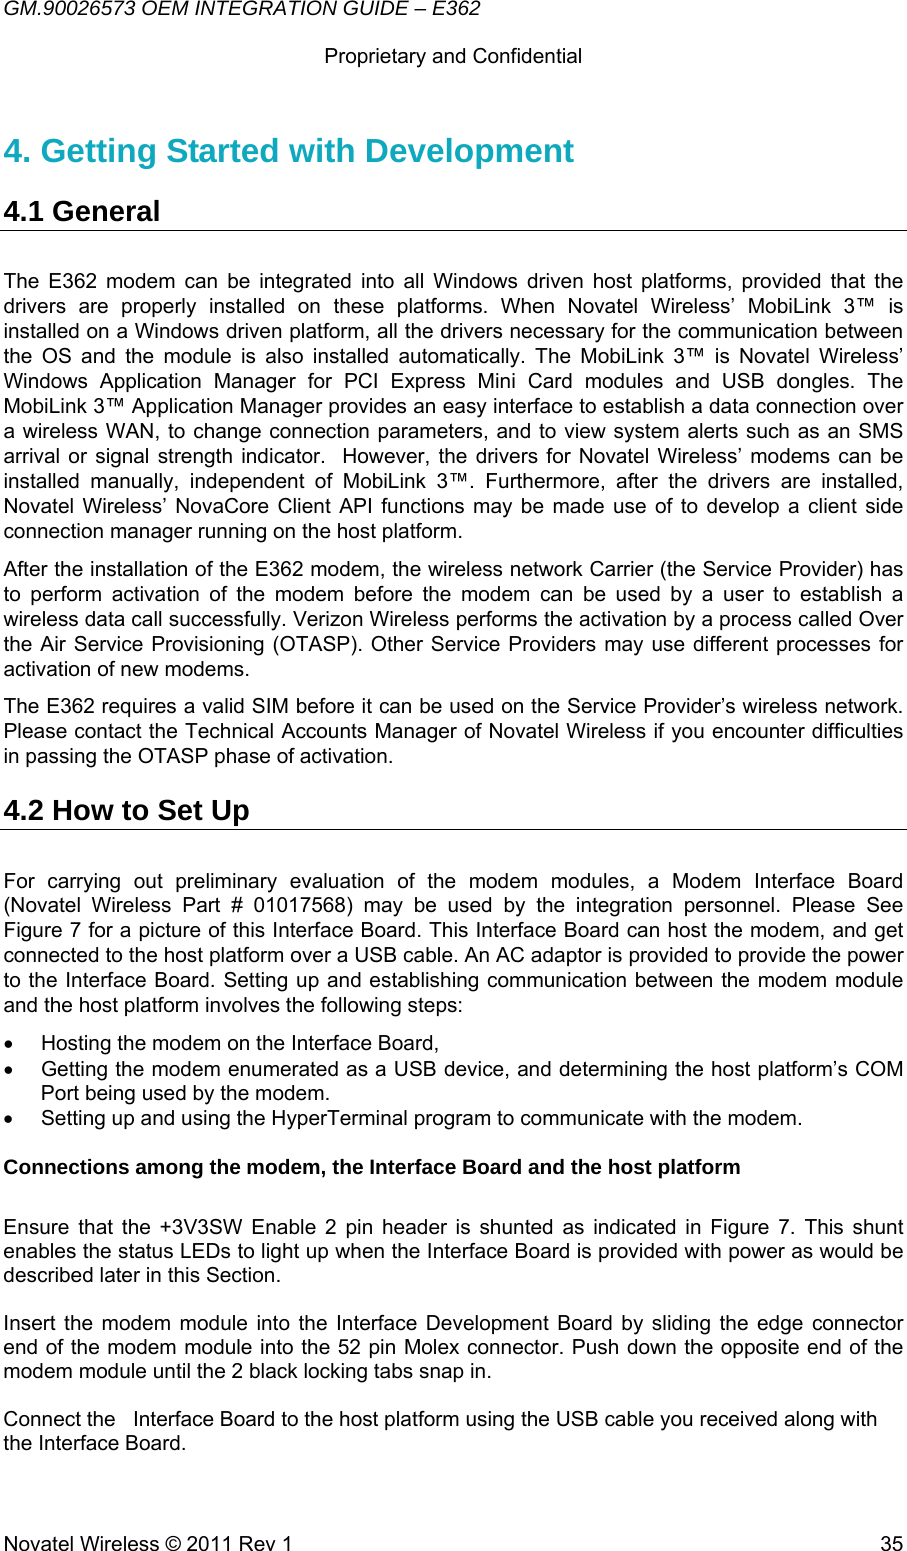 GM.90026573 OEM INTEGRATION GUIDE – E362      Proprietary and Confidential   Novatel Wireless © 2011 Rev 1  354. Getting Started with Development  4.1 General The E362 modem can be integrated into all Windows driven host platforms, provided that the drivers are properly installed on these platforms. When Novatel Wireless’ MobiLink 3™ is installed on a Windows driven platform, all the drivers necessary for the communication between the OS and the module is also installed automatically. The MobiLink 3™ is Novatel Wireless’ Windows Application Manager for PCI Express Mini Card modules and USB dongles. The MobiLink 3™ Application Manager provides an easy interface to establish a data connection over a wireless WAN, to change connection parameters, and to view system alerts such as an SMS arrival or signal strength indicator.  However, the drivers for Novatel Wireless’ modems can be installed manually, independent of MobiLink 3™. Furthermore, after the drivers are installed, Novatel Wireless’ NovaCore Client API functions may be made use of to develop a client side connection manager running on the host platform. After the installation of the E362 modem, the wireless network Carrier (the Service Provider) has to perform activation of the modem before the modem can be used by a user to establish a wireless data call successfully. Verizon Wireless performs the activation by a process called Over the Air Service Provisioning (OTASP). Other Service Providers may use different processes for activation of new modems. The E362 requires a valid SIM before it can be used on the Service Provider’s wireless network. Please contact the Technical Accounts Manager of Novatel Wireless if you encounter difficulties in passing the OTASP phase of activation. 4.2 How to Set Up For carrying out preliminary evaluation of the modem modules, a Modem Interface Board (Novatel Wireless Part # 01017568) may be used by the integration personnel. Please See Figure 7 for a picture of this Interface Board. This Interface Board can host the modem, and get connected to the host platform over a USB cable. An AC adaptor is provided to provide the power to the Interface Board. Setting up and establishing communication between the modem module and the host platform involves the following steps:  •  Hosting the modem on the Interface Board,  •  Getting the modem enumerated as a USB device, and determining the host platform’s COM Port being used by the modem. •  Setting up and using the HyperTerminal program to communicate with the modem.  Connections among the modem, the Interface Board and the host platform  Ensure that the +3V3SW Enable 2 pin header is shunted as indicated in Figure 7. This shunt enables the status LEDs to light up when the Interface Board is provided with power as would be described later in this Section.  Insert the modem module into the Interface Development Board by sliding the edge connector end of the modem module into the 52 pin Molex connector. Push down the opposite end of the modem module until the 2 black locking tabs snap in.   Connect the   Interface Board to the host platform using the USB cable you received along with the Interface Board.  